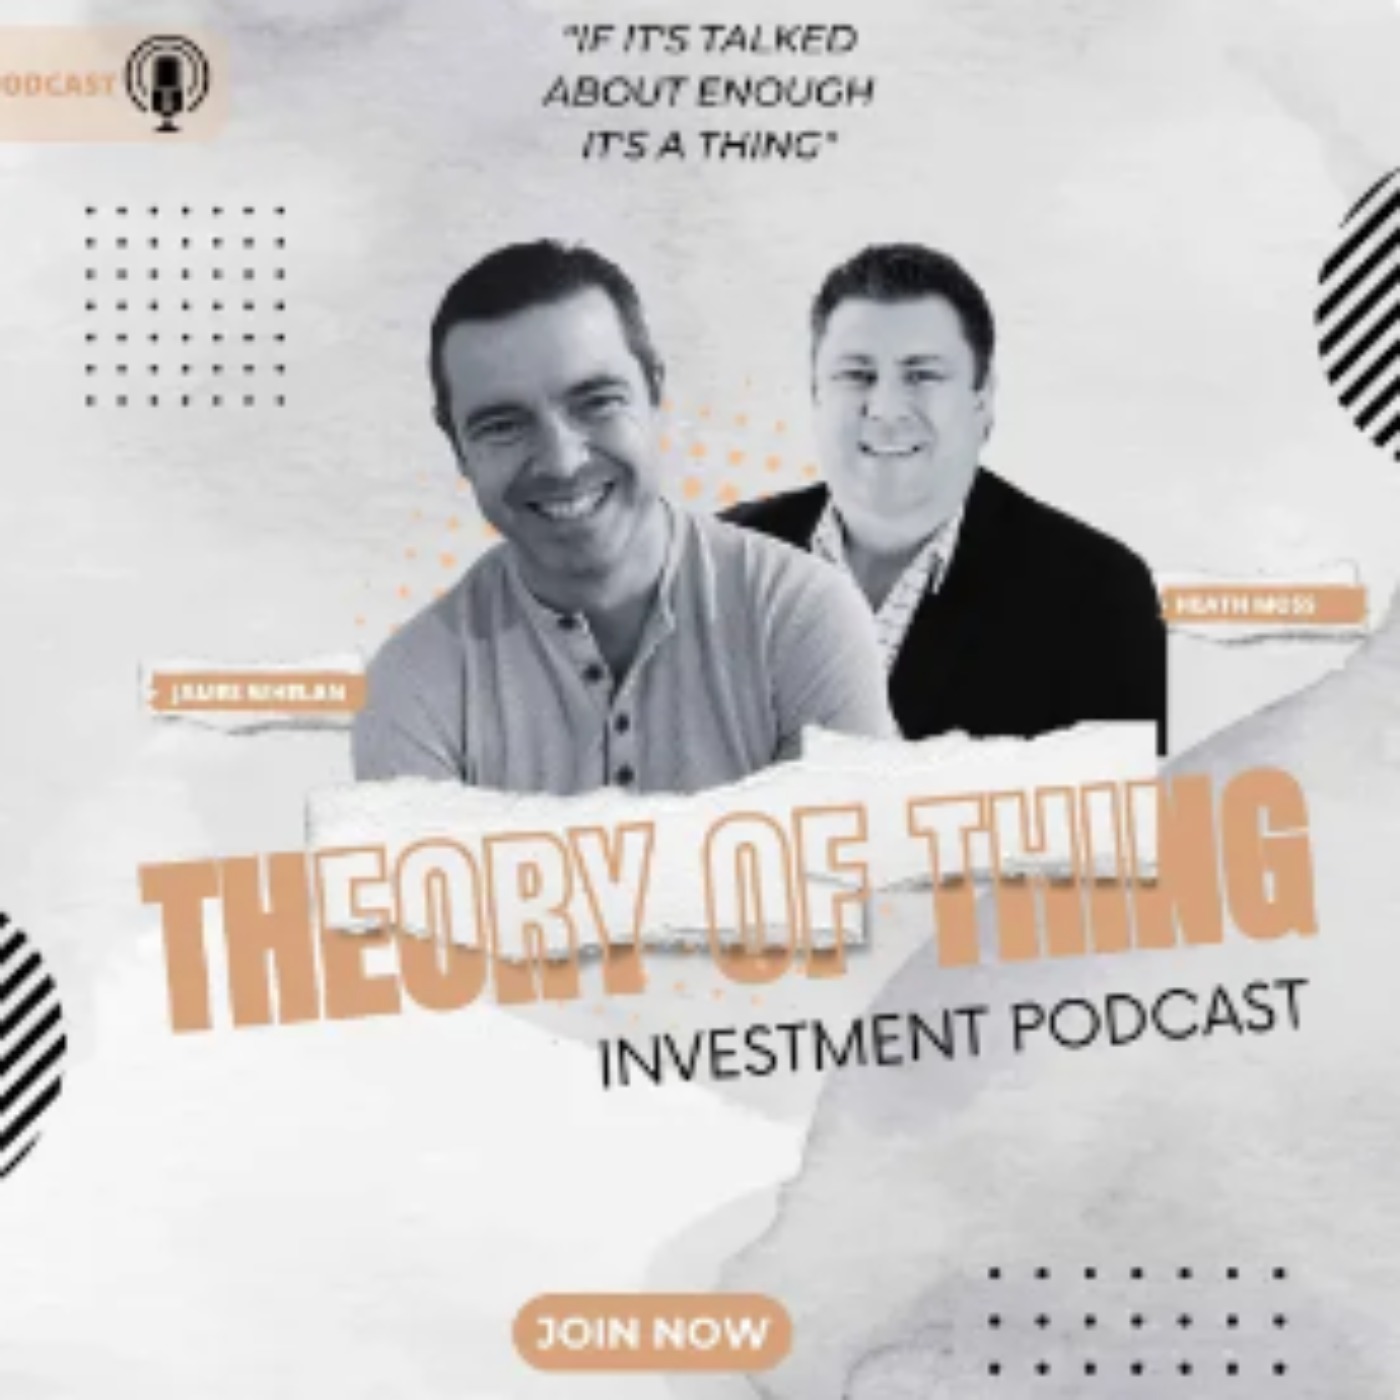 The Theory of Thing Investment Podcast